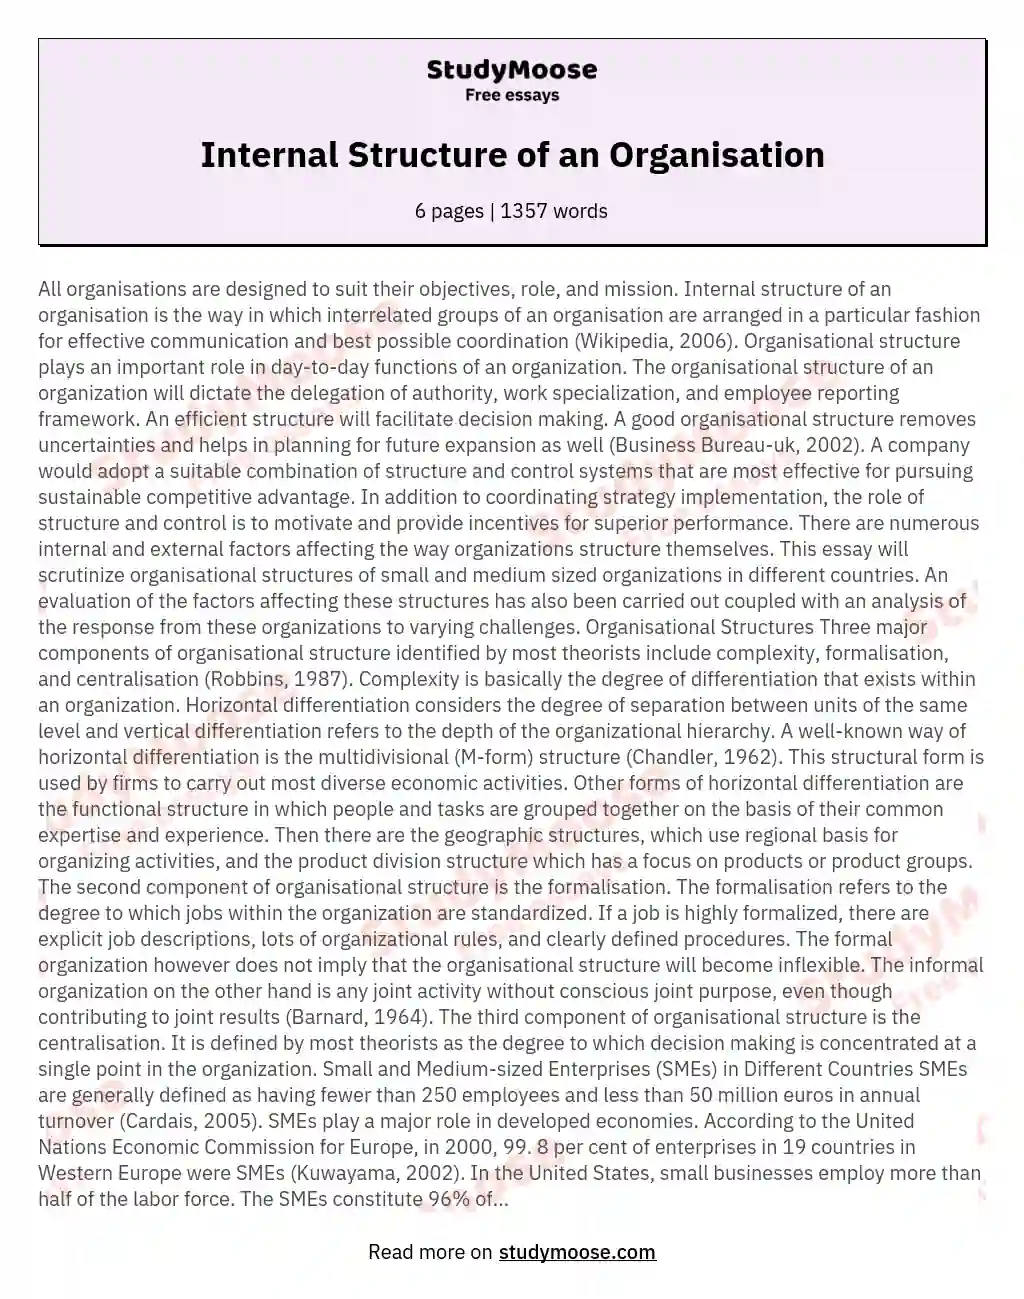 why is organizational structure important essay